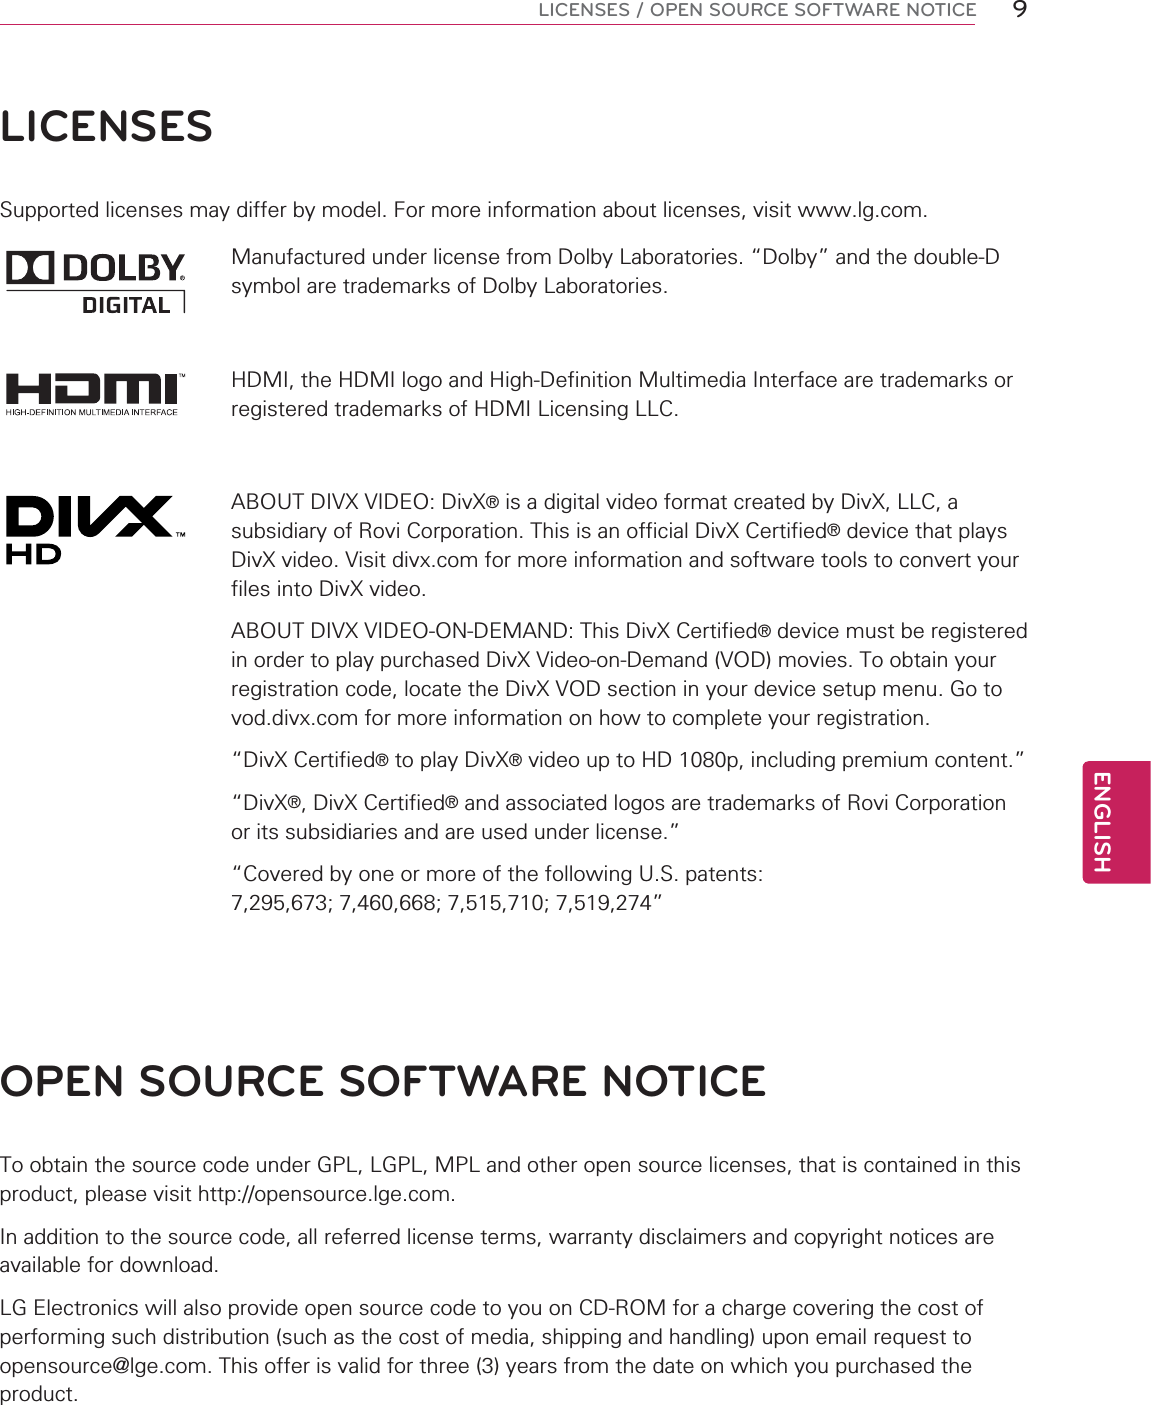 ENGLISH9LICENSES / OPEN SOURCE SOFTWARE NOTICELICENSESSupported licenses may differ by model. For more information about licenses, visit www.lg.com.Manufactured under license from Dolby Laboratories. “Dolby” and the double-D symbol are trademarks of Dolby Laboratories.HDMI, the HDMI logo and High-Definition Multimedia Interface are trademarks or registered trademarks of HDMI Licensing LLC.ABOUT DIVX VIDEO: DivX® is a digital video format created by DivX, LLC, a subsidiary of Rovi Corporation. This is an official DivX Certified® device that plays DivX video. Visit divx.com for more information and software tools to convert your files into DivX video.ABOUT DIVX VIDEO-ON-DEMAND: This DivX Certified® device must be registered in order to play purchased DivX Video-on-Demand (VOD) movies. To obtain your registration code, locate the DivX VOD section in your device setup menu. Go to vod.divx.com for more information on how to complete your registration. “DivX Certified® to play DivX® video up to HD 1080p, including premium content.”“DivX®, DivX Certified® and associated logos are trademarks of Rovi Corporation or its subsidiaries and are used under license.”“Covered by one or more of the following U.S. patents: 7,295,673; 7,460,668; 7,515,710; 7,519,274”OPEN SOURCE SOFTWARE NOTICETo obtain the source code under GPL, LGPL, MPL and other open source licenses, that is contained in this product, please visit http://opensource.lge.com.In addition to the source code, all referred license terms, warranty disclaimers and copyright notices are available for download.LG Electronics will also provide open source code to you on CD-ROM for a charge covering the cost of performing such distribution (such as the cost of media, shipping and handling) upon email request to opensource@lge.com. This offer is valid for three (3) years from the date on which you purchased the product.